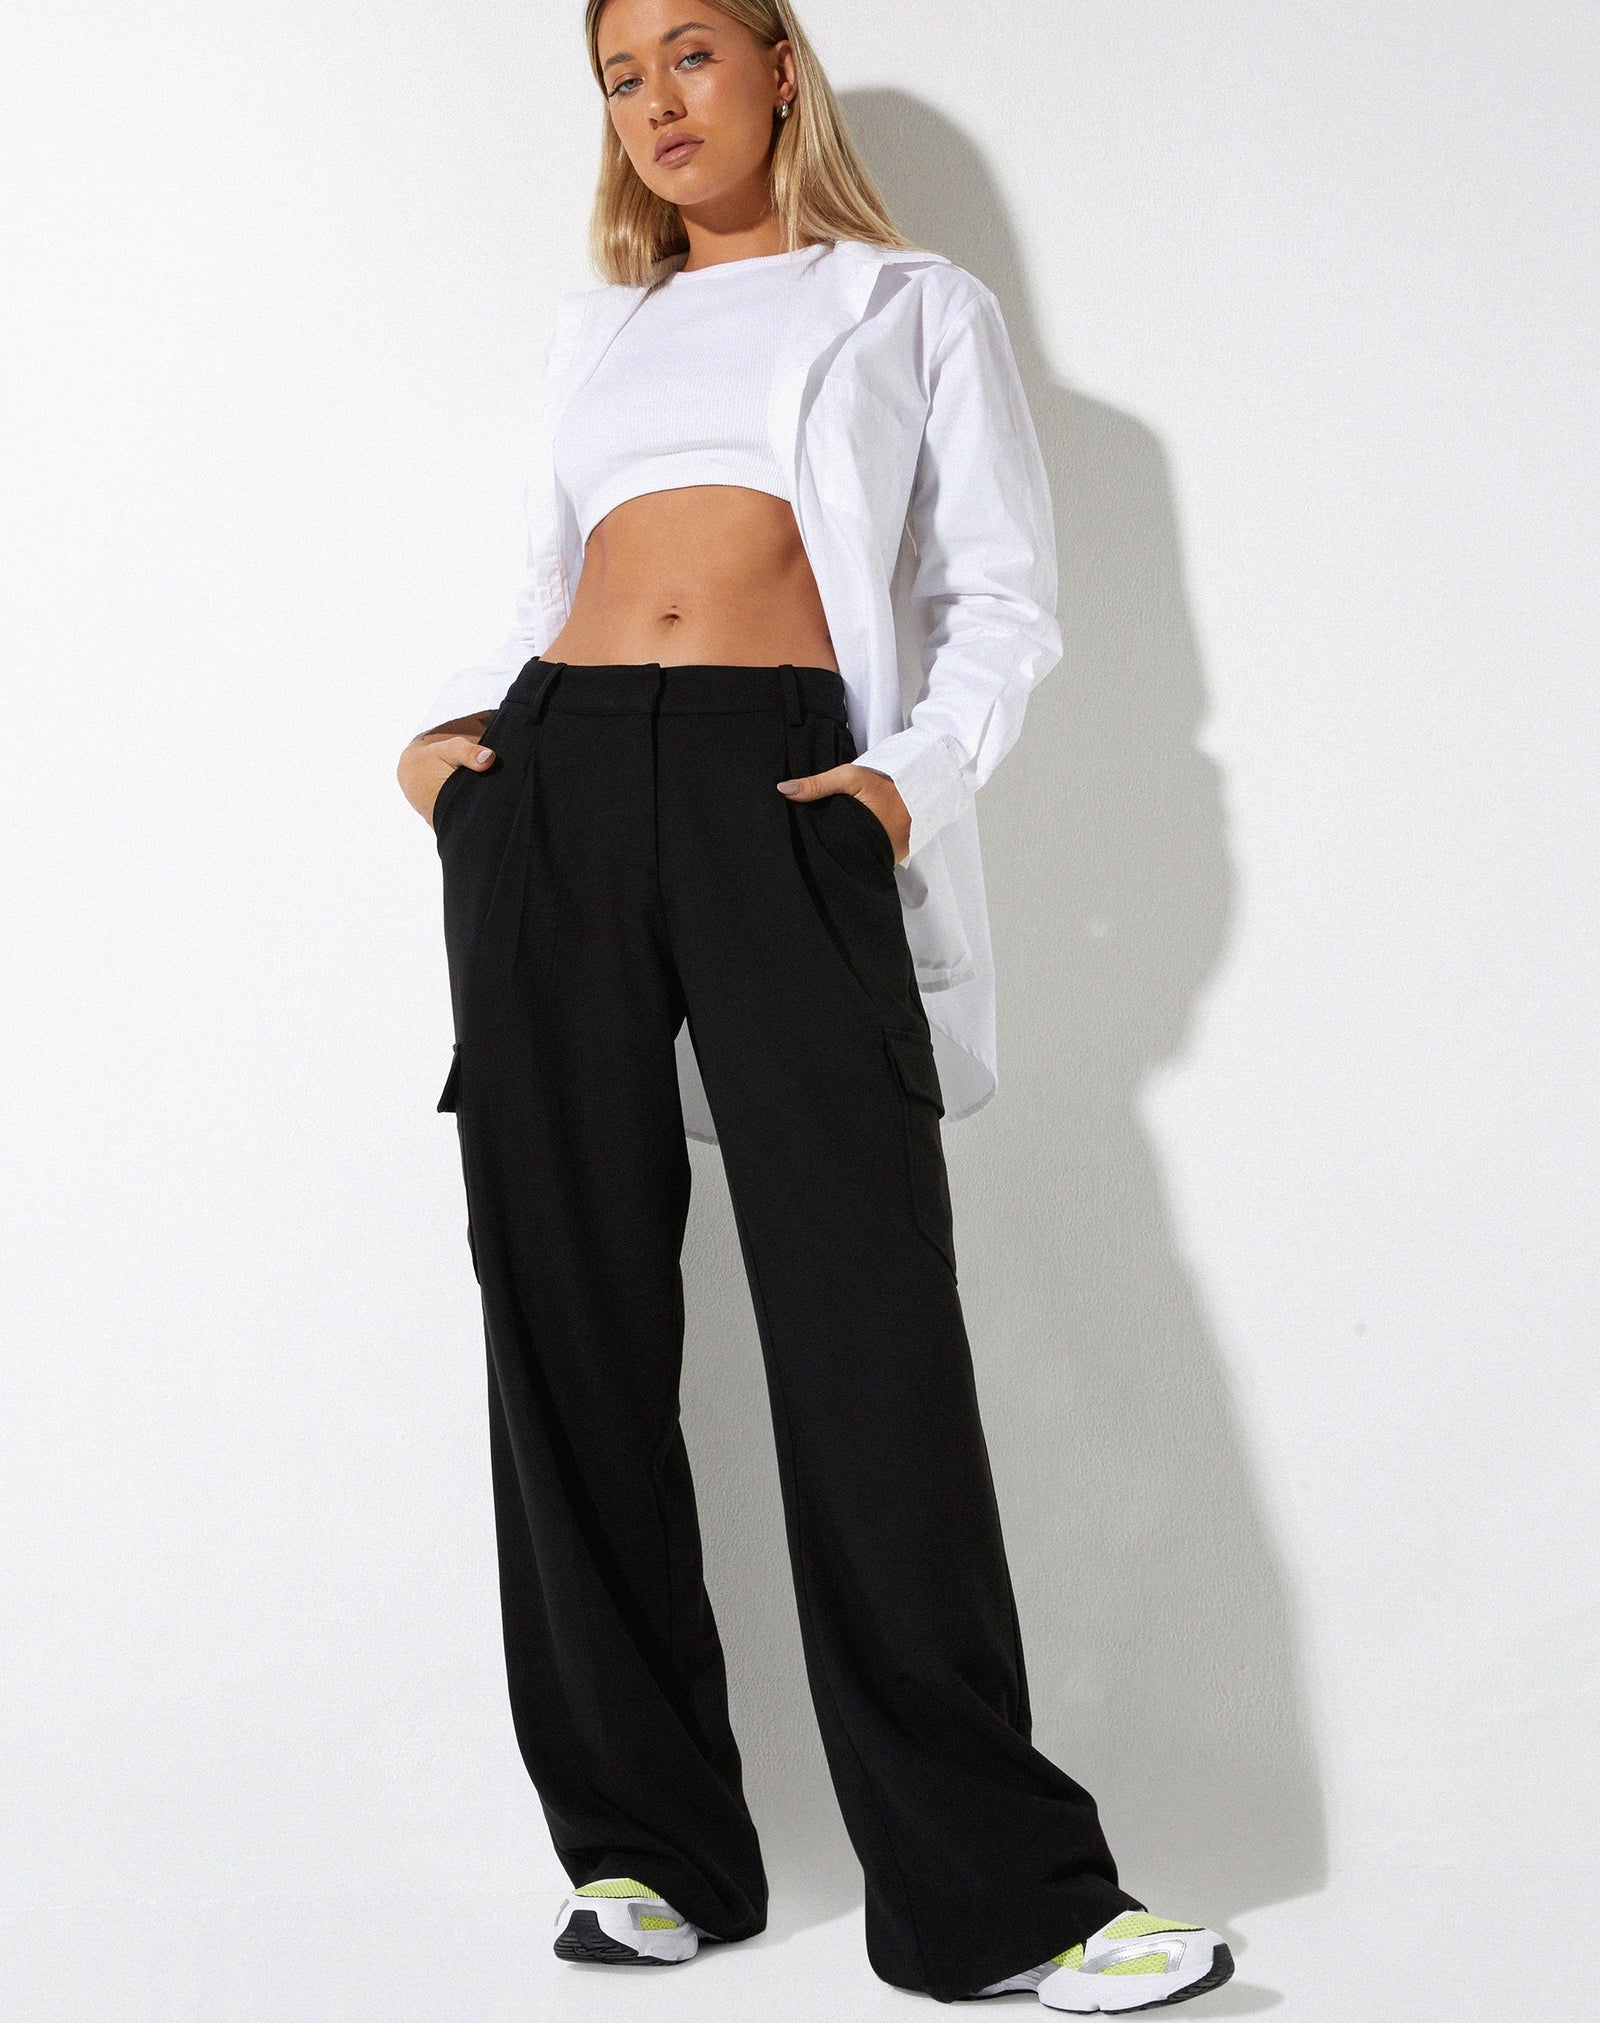 Low Rise Criss Cross Suit Trousers Black  SourceUnknown